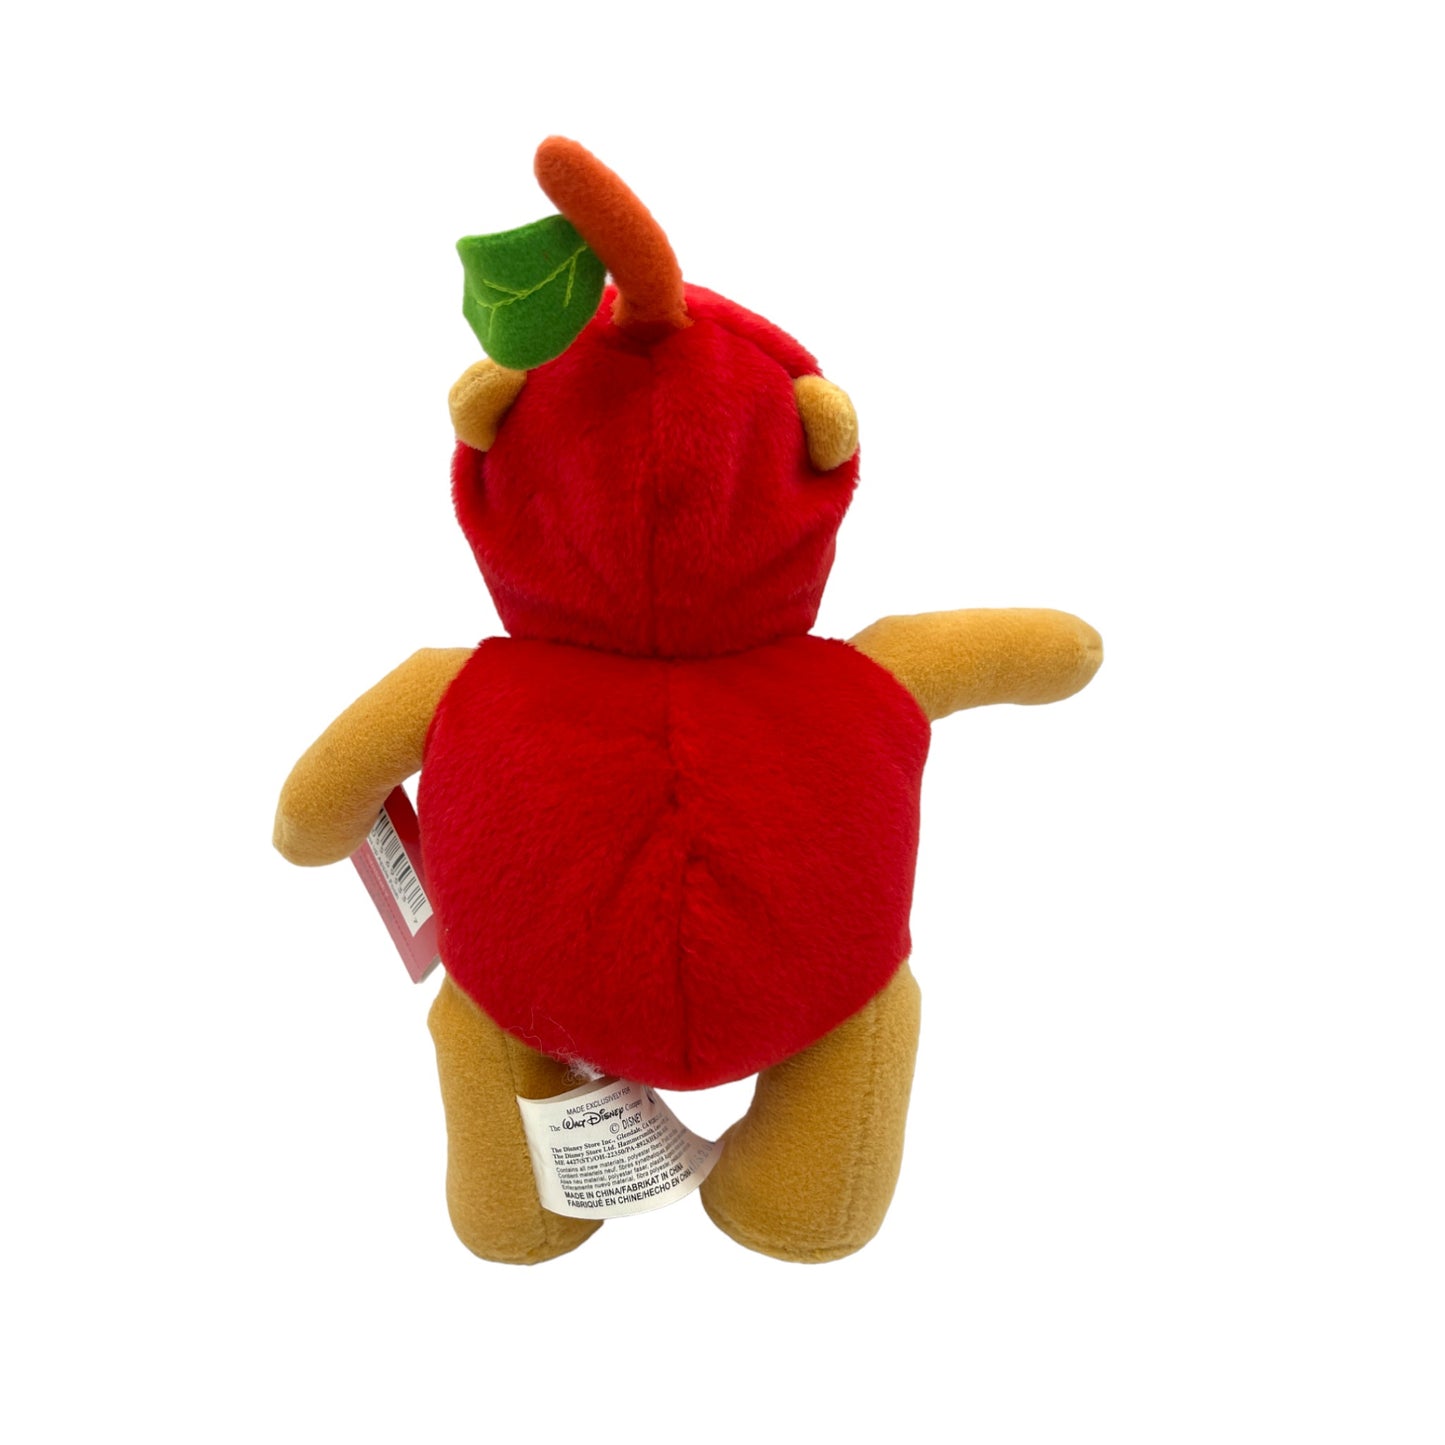 Disney Store - Dressed Up Apple Pooh - Mini Bean Bag - With Tag - 8"